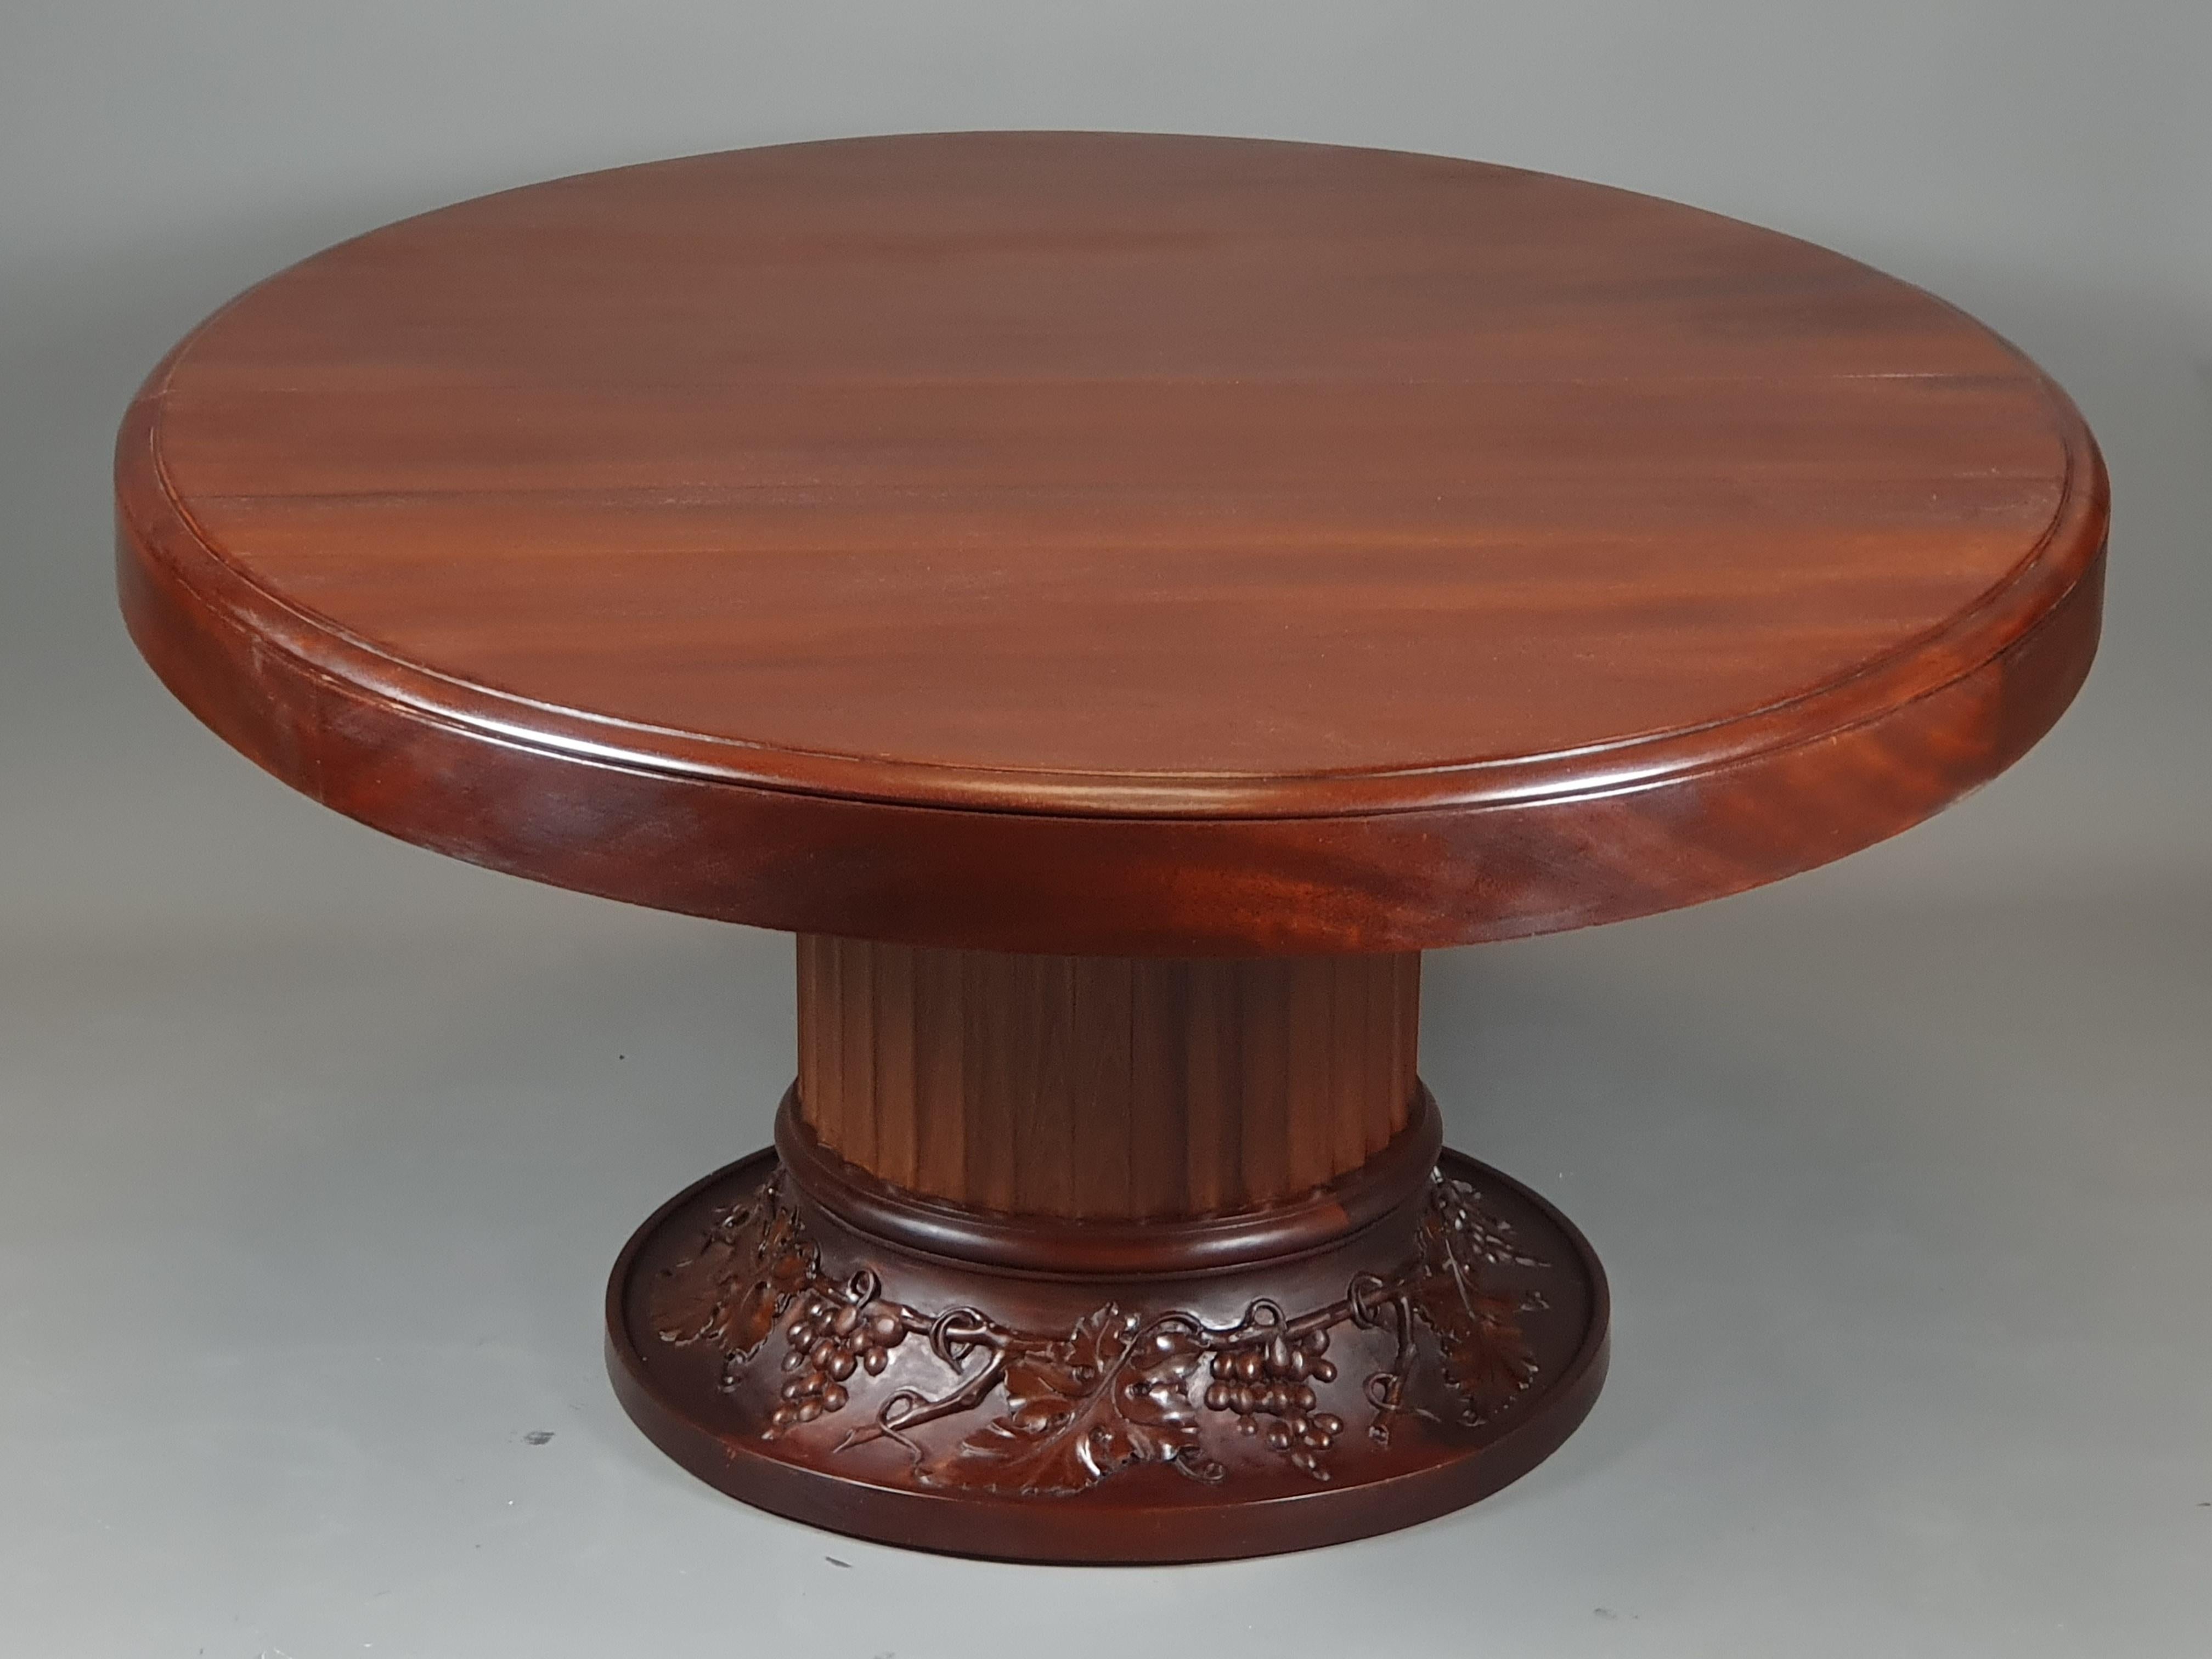 Large table with oval-shaped top and base consisting of an imposing round fluted shaft supported by a flared base carved with vine branches.

Work of quality from Bordeaux around 1930

Top extendable by a so-called French-style slide system